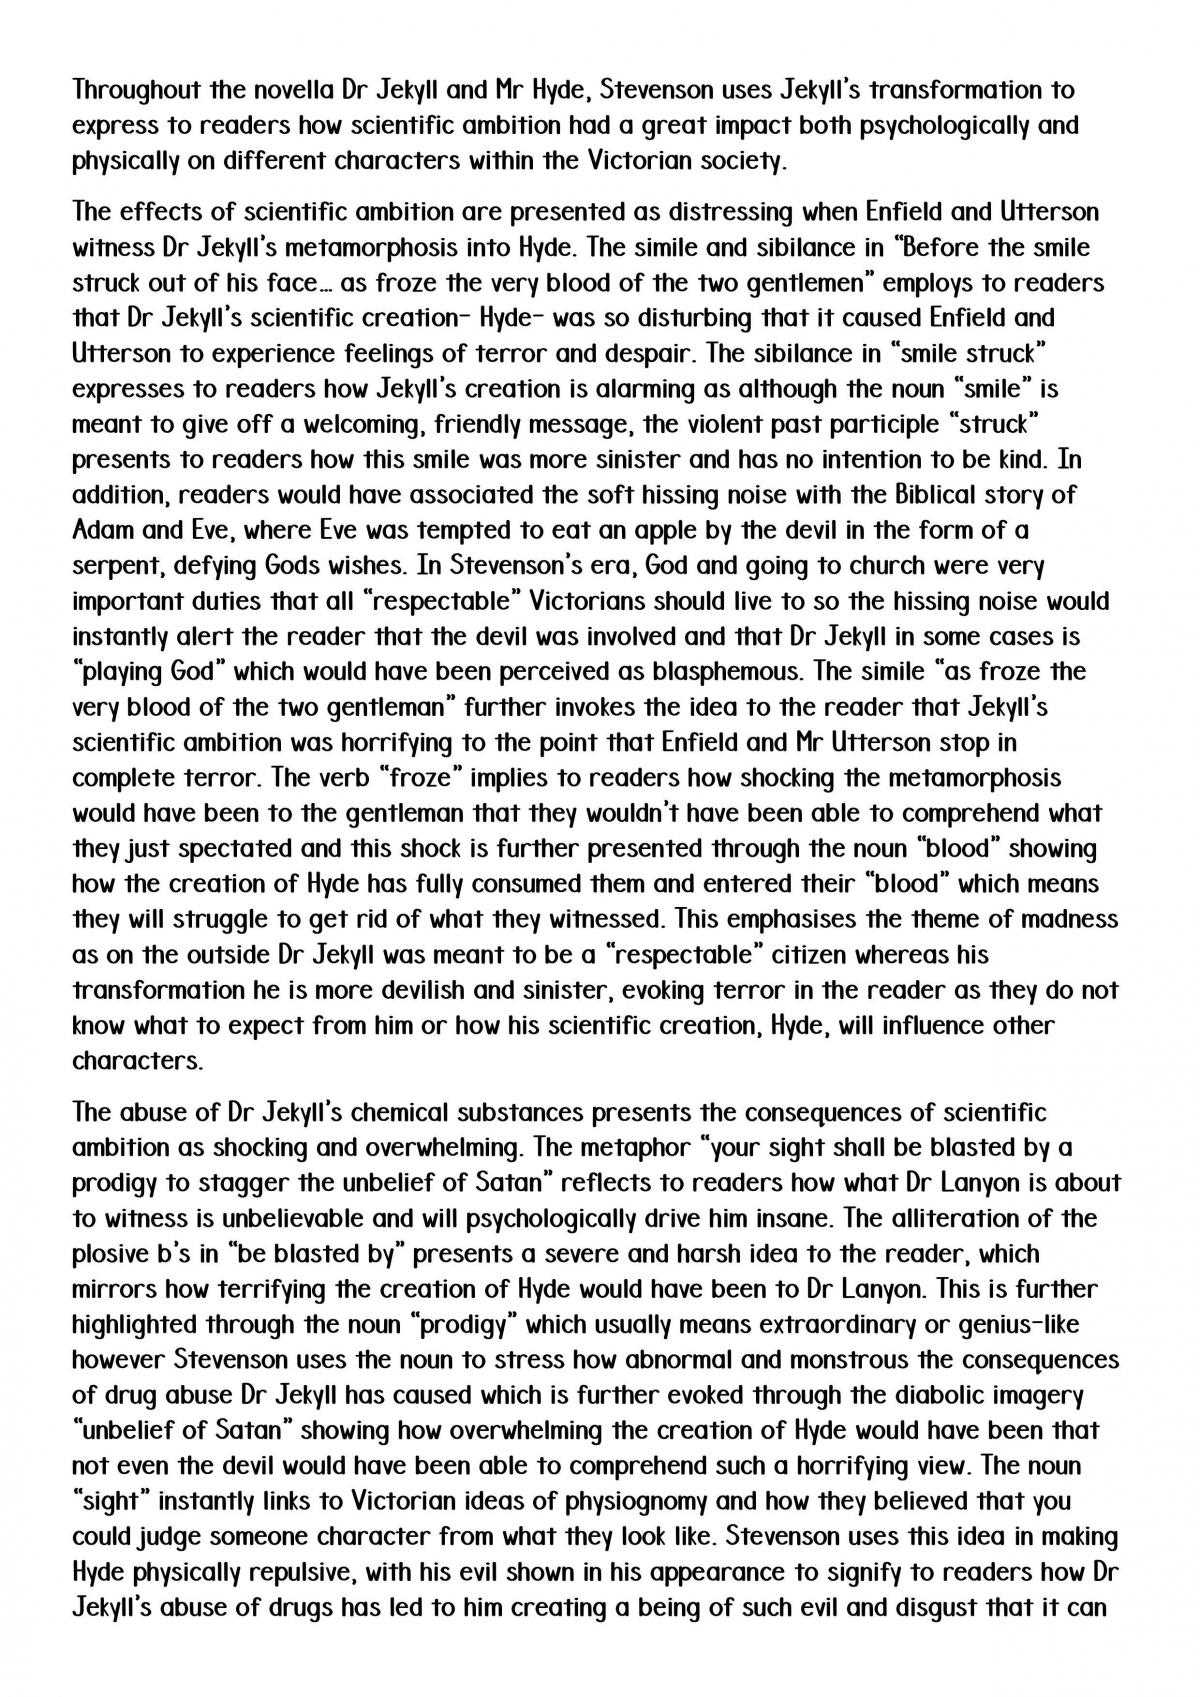 dr jekyll and mr hyde essay introduction